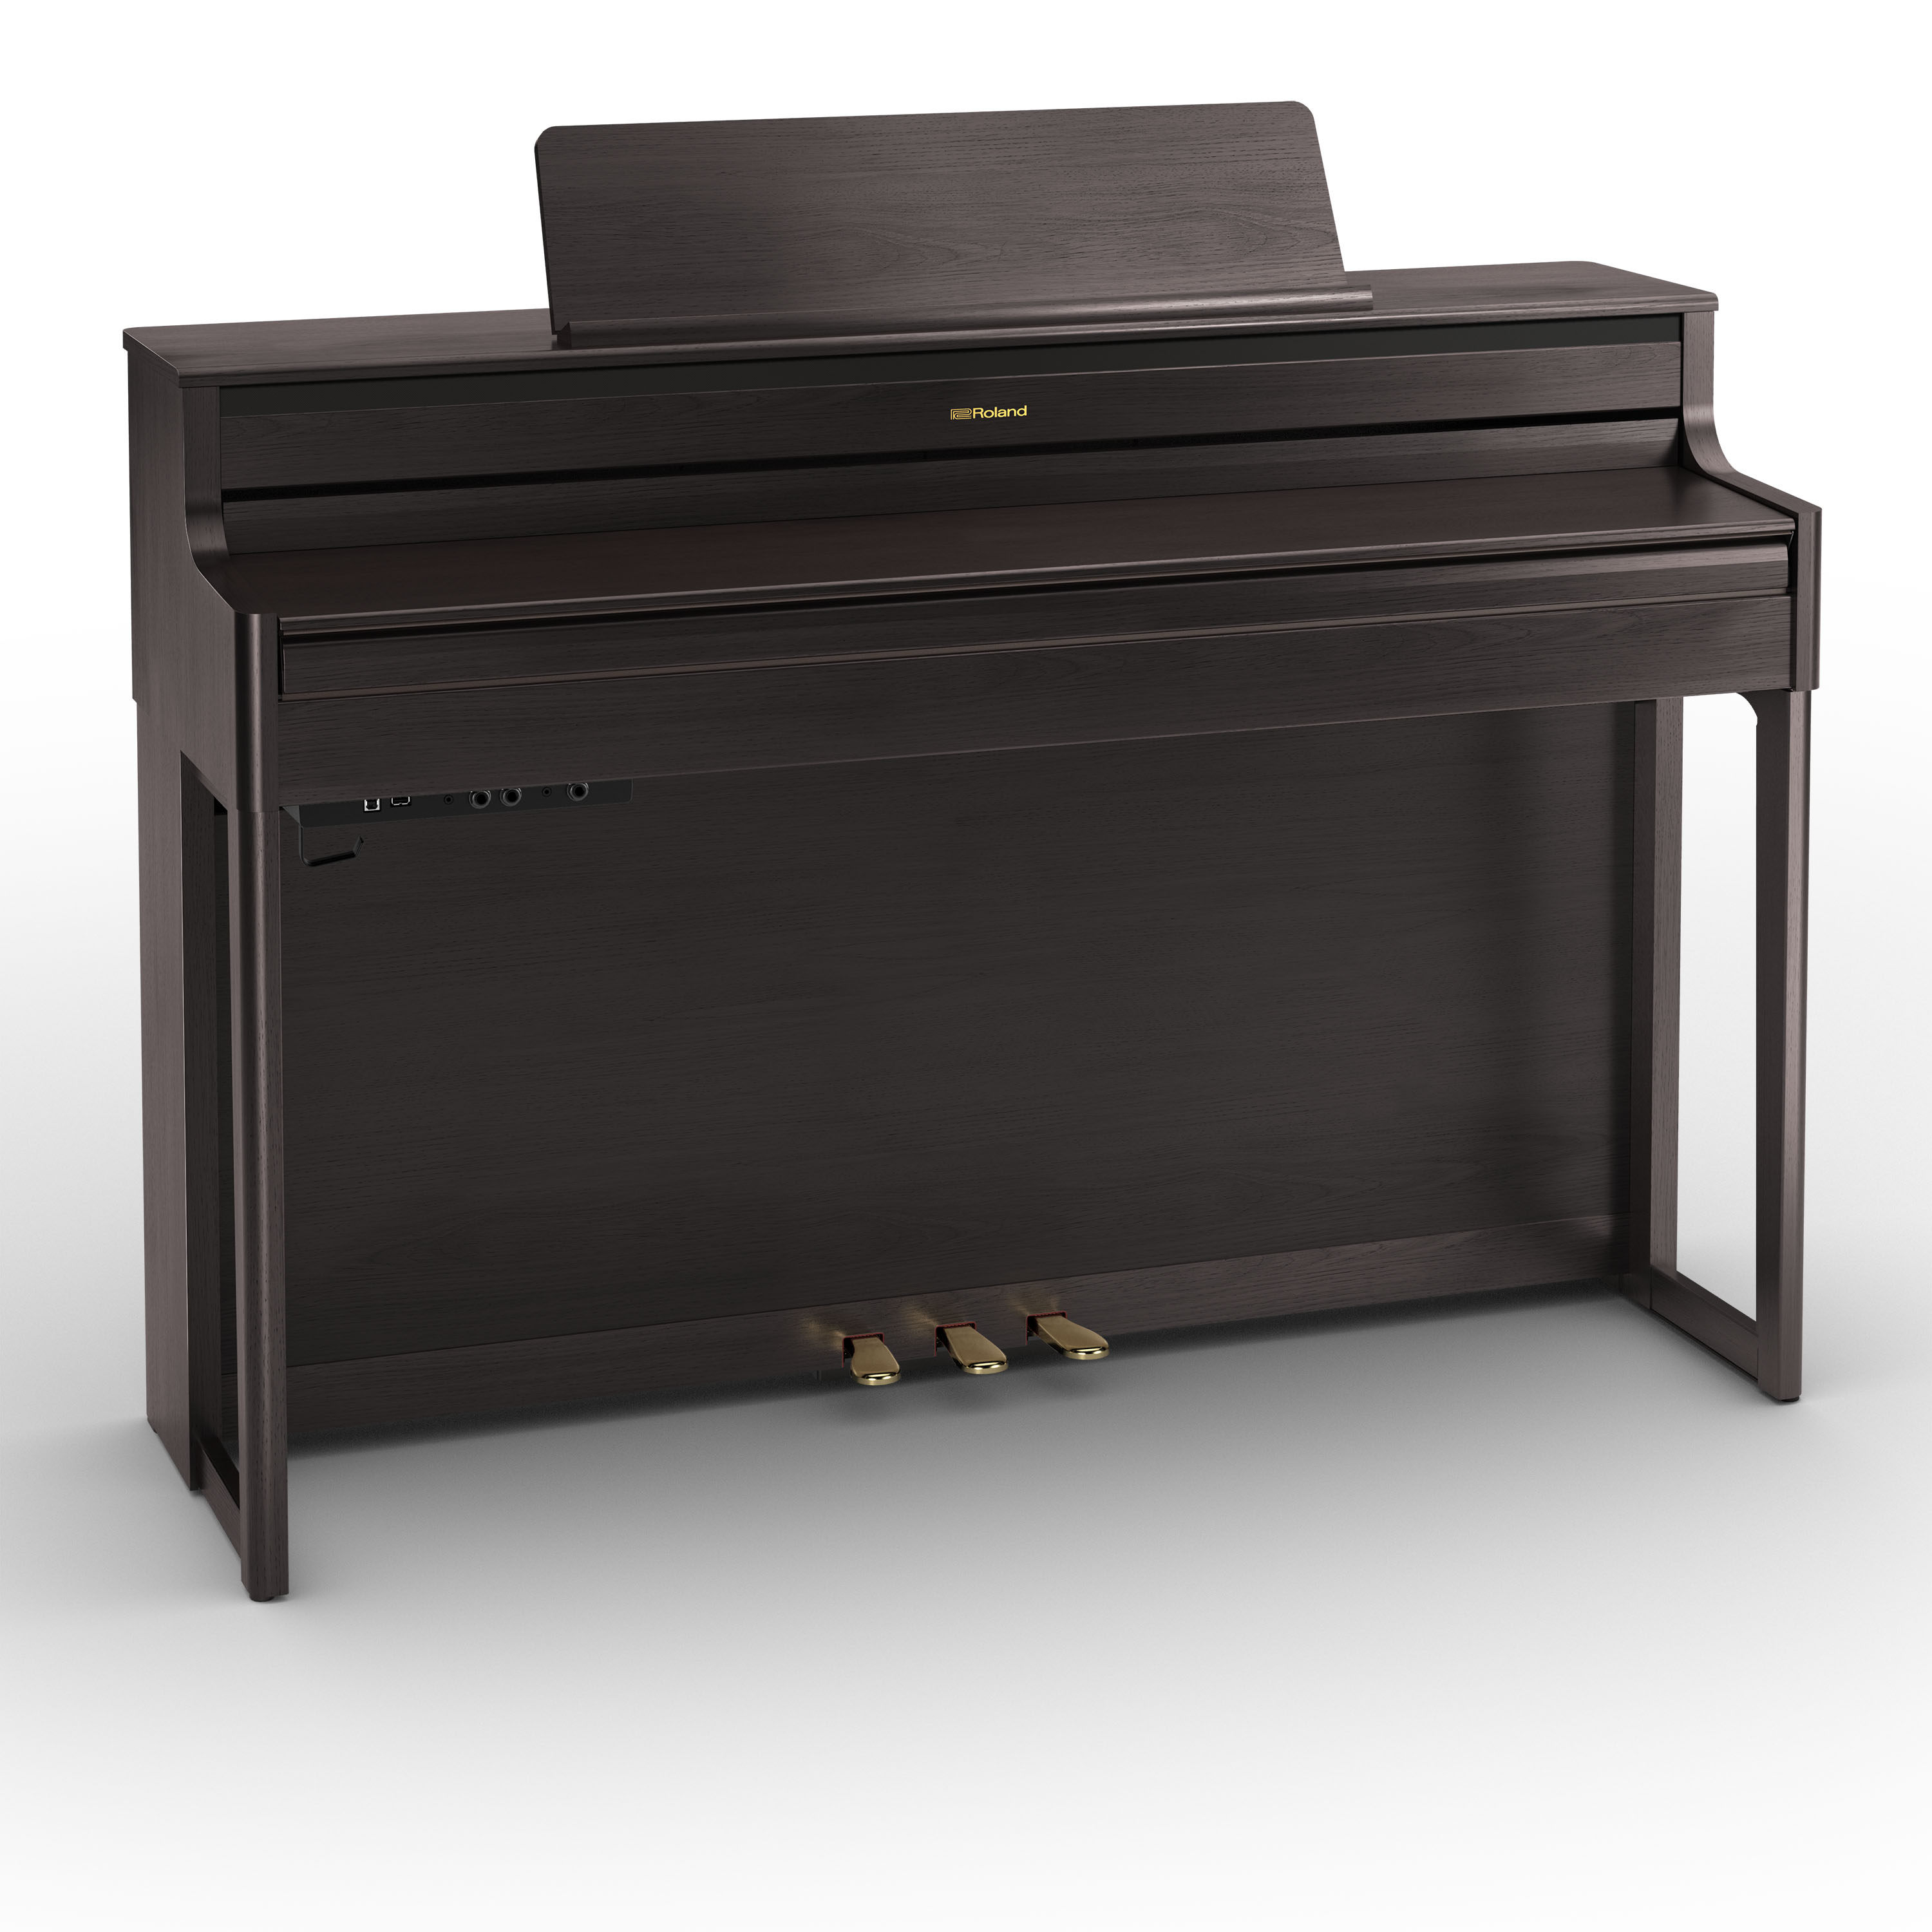 Roland Hp704 Dr Rosewood - Piano digital con mueble - Variation 1